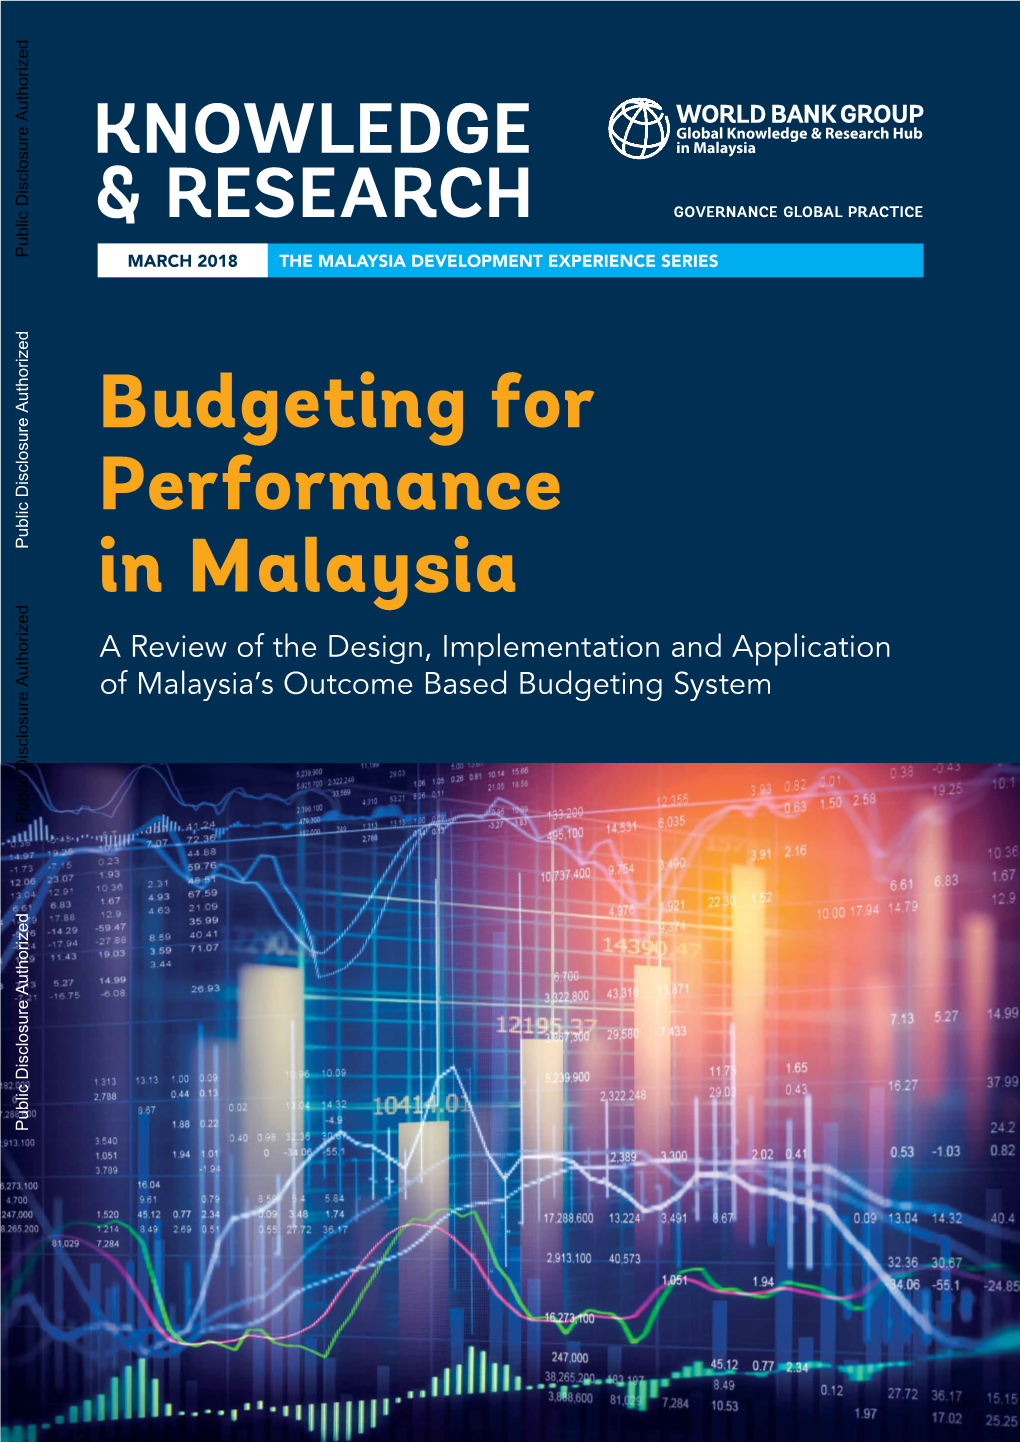 Objectives and Design of Outcome Based Budgeting